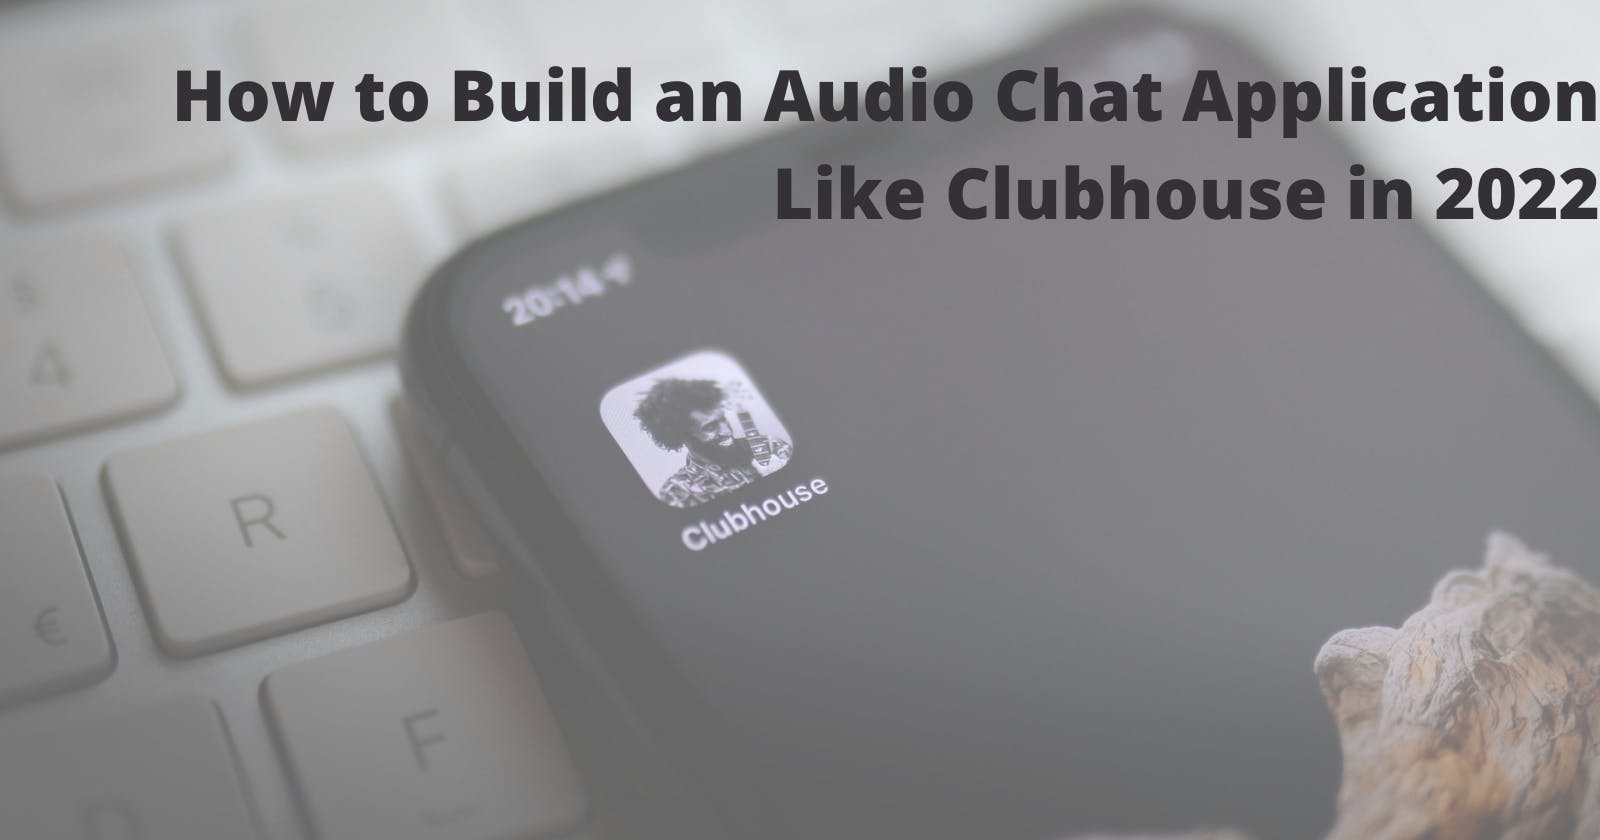 How to Build an Audio Chat Application Like Clubhouse in 2022